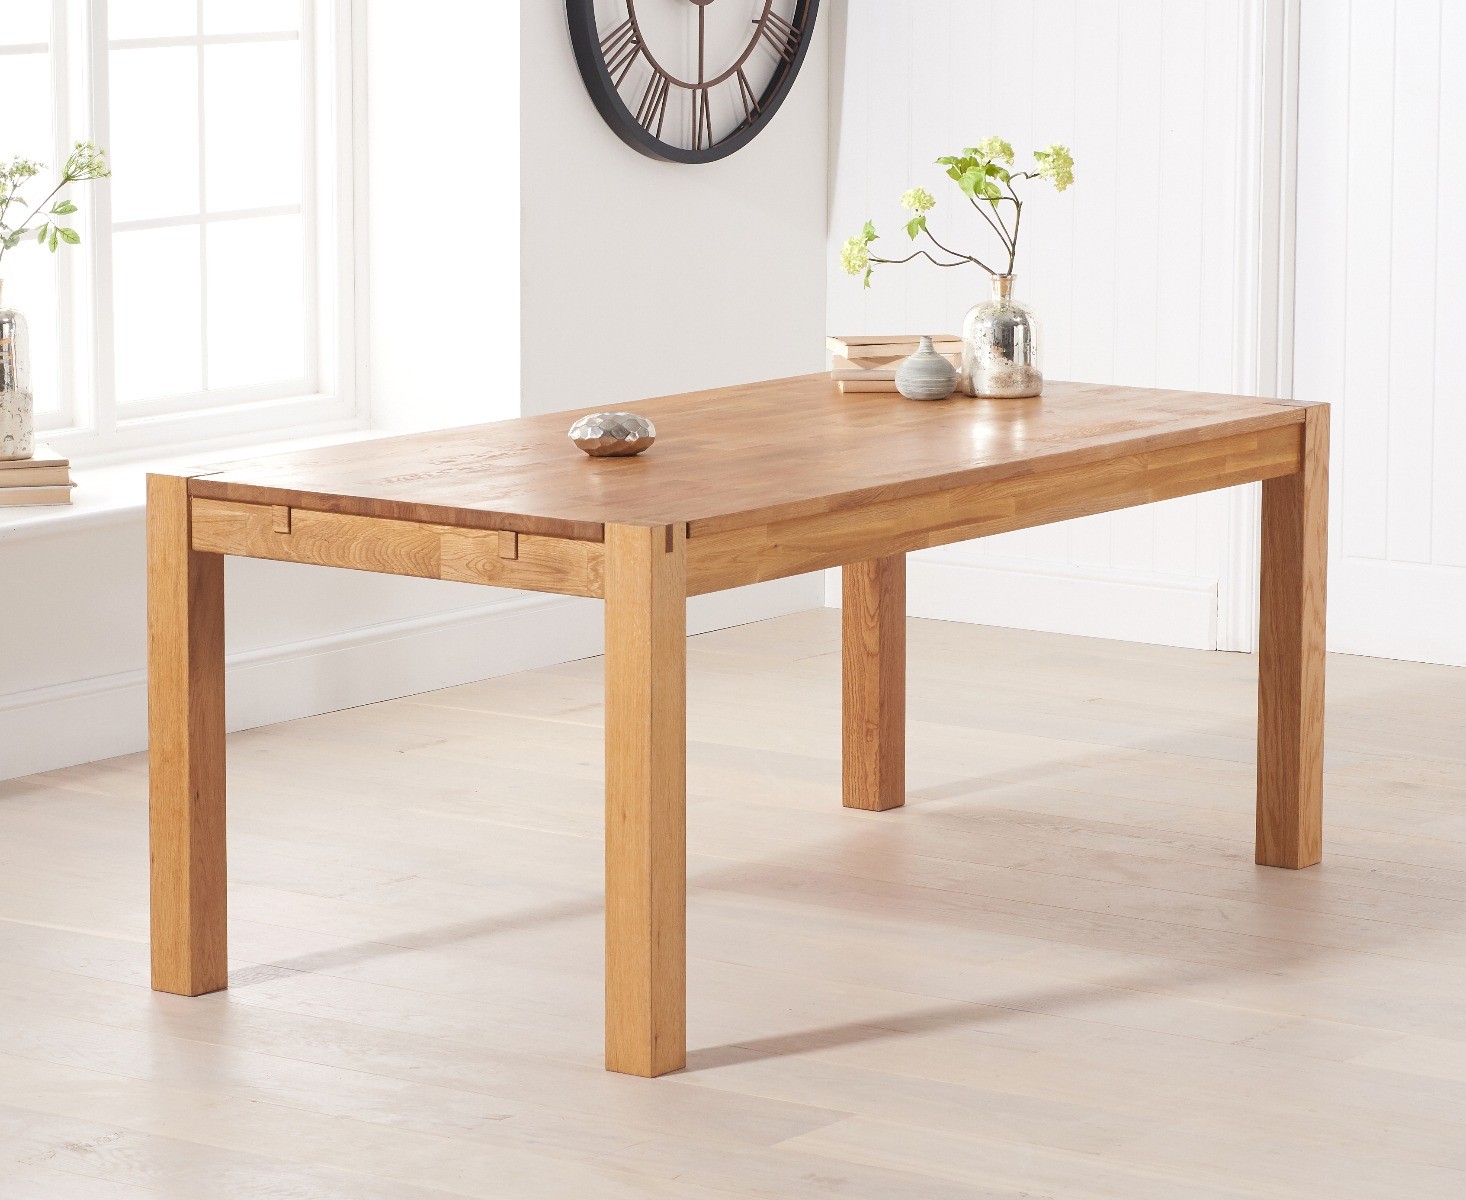 Photo 1 of Verona 150cm oak table with heidi grey faux leather benches